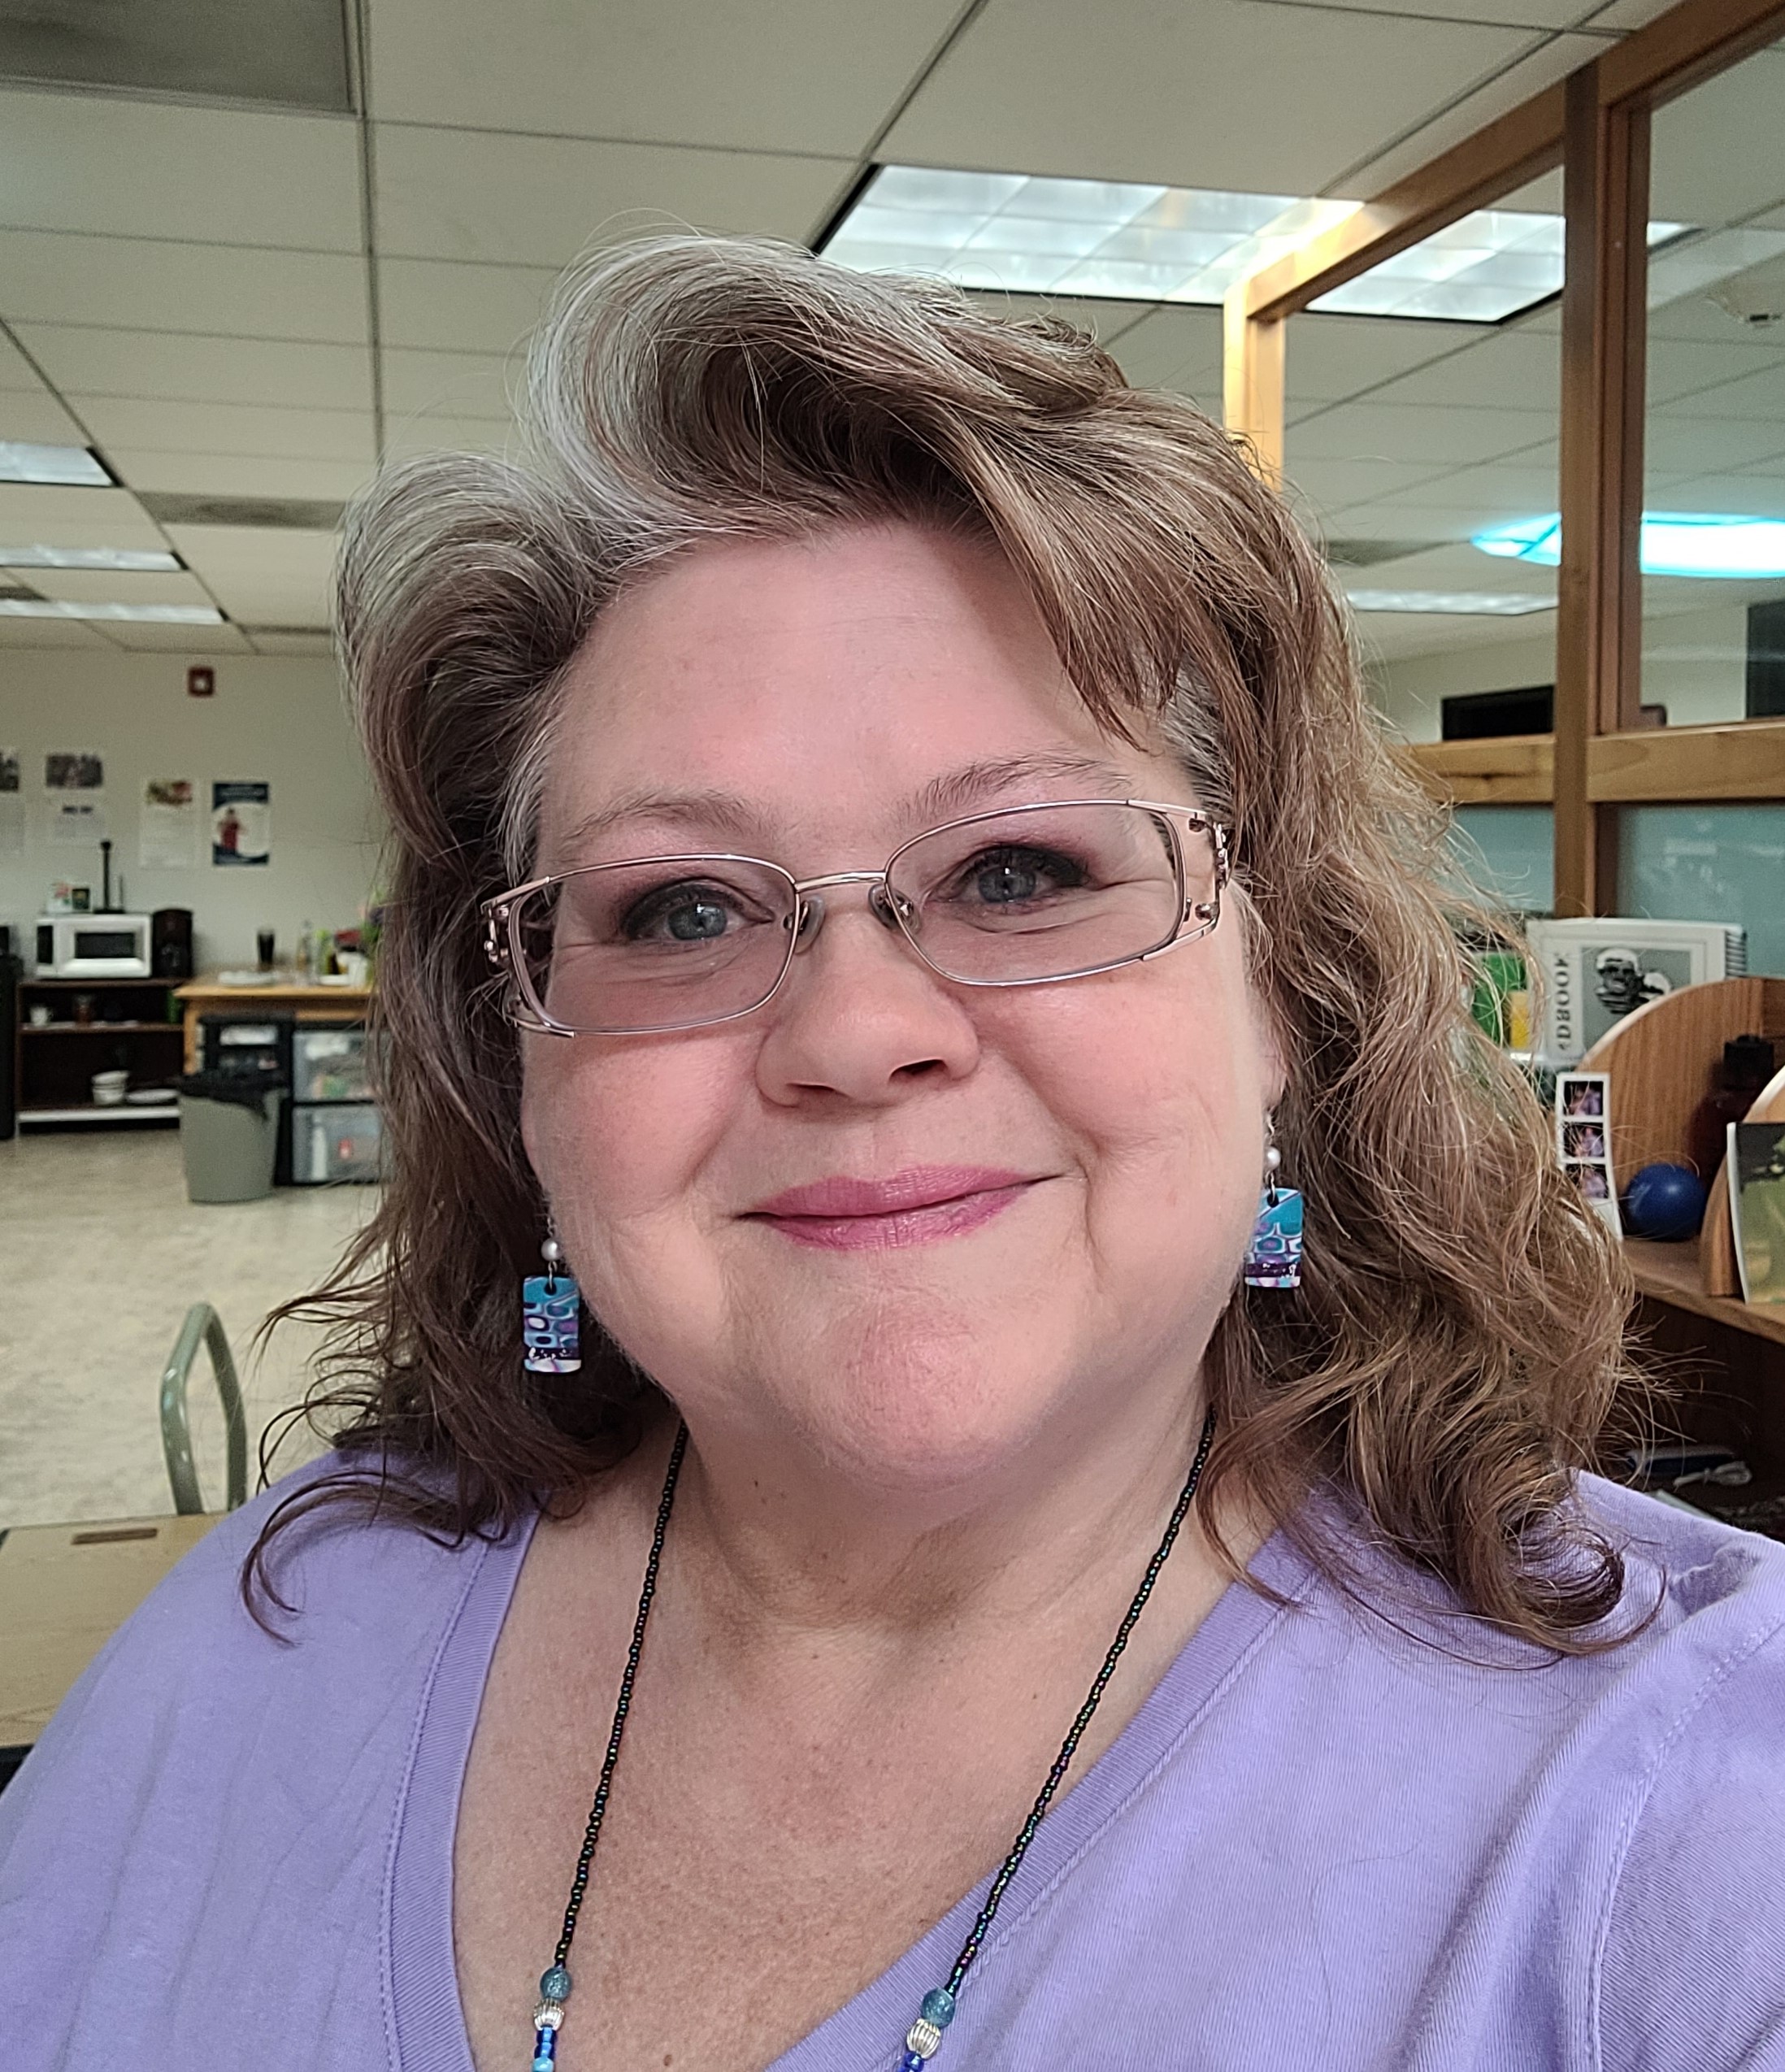 Photo of Program Manager Tracy Agiovlasitis wearing glasses, a purple top, and colorful blue earrings